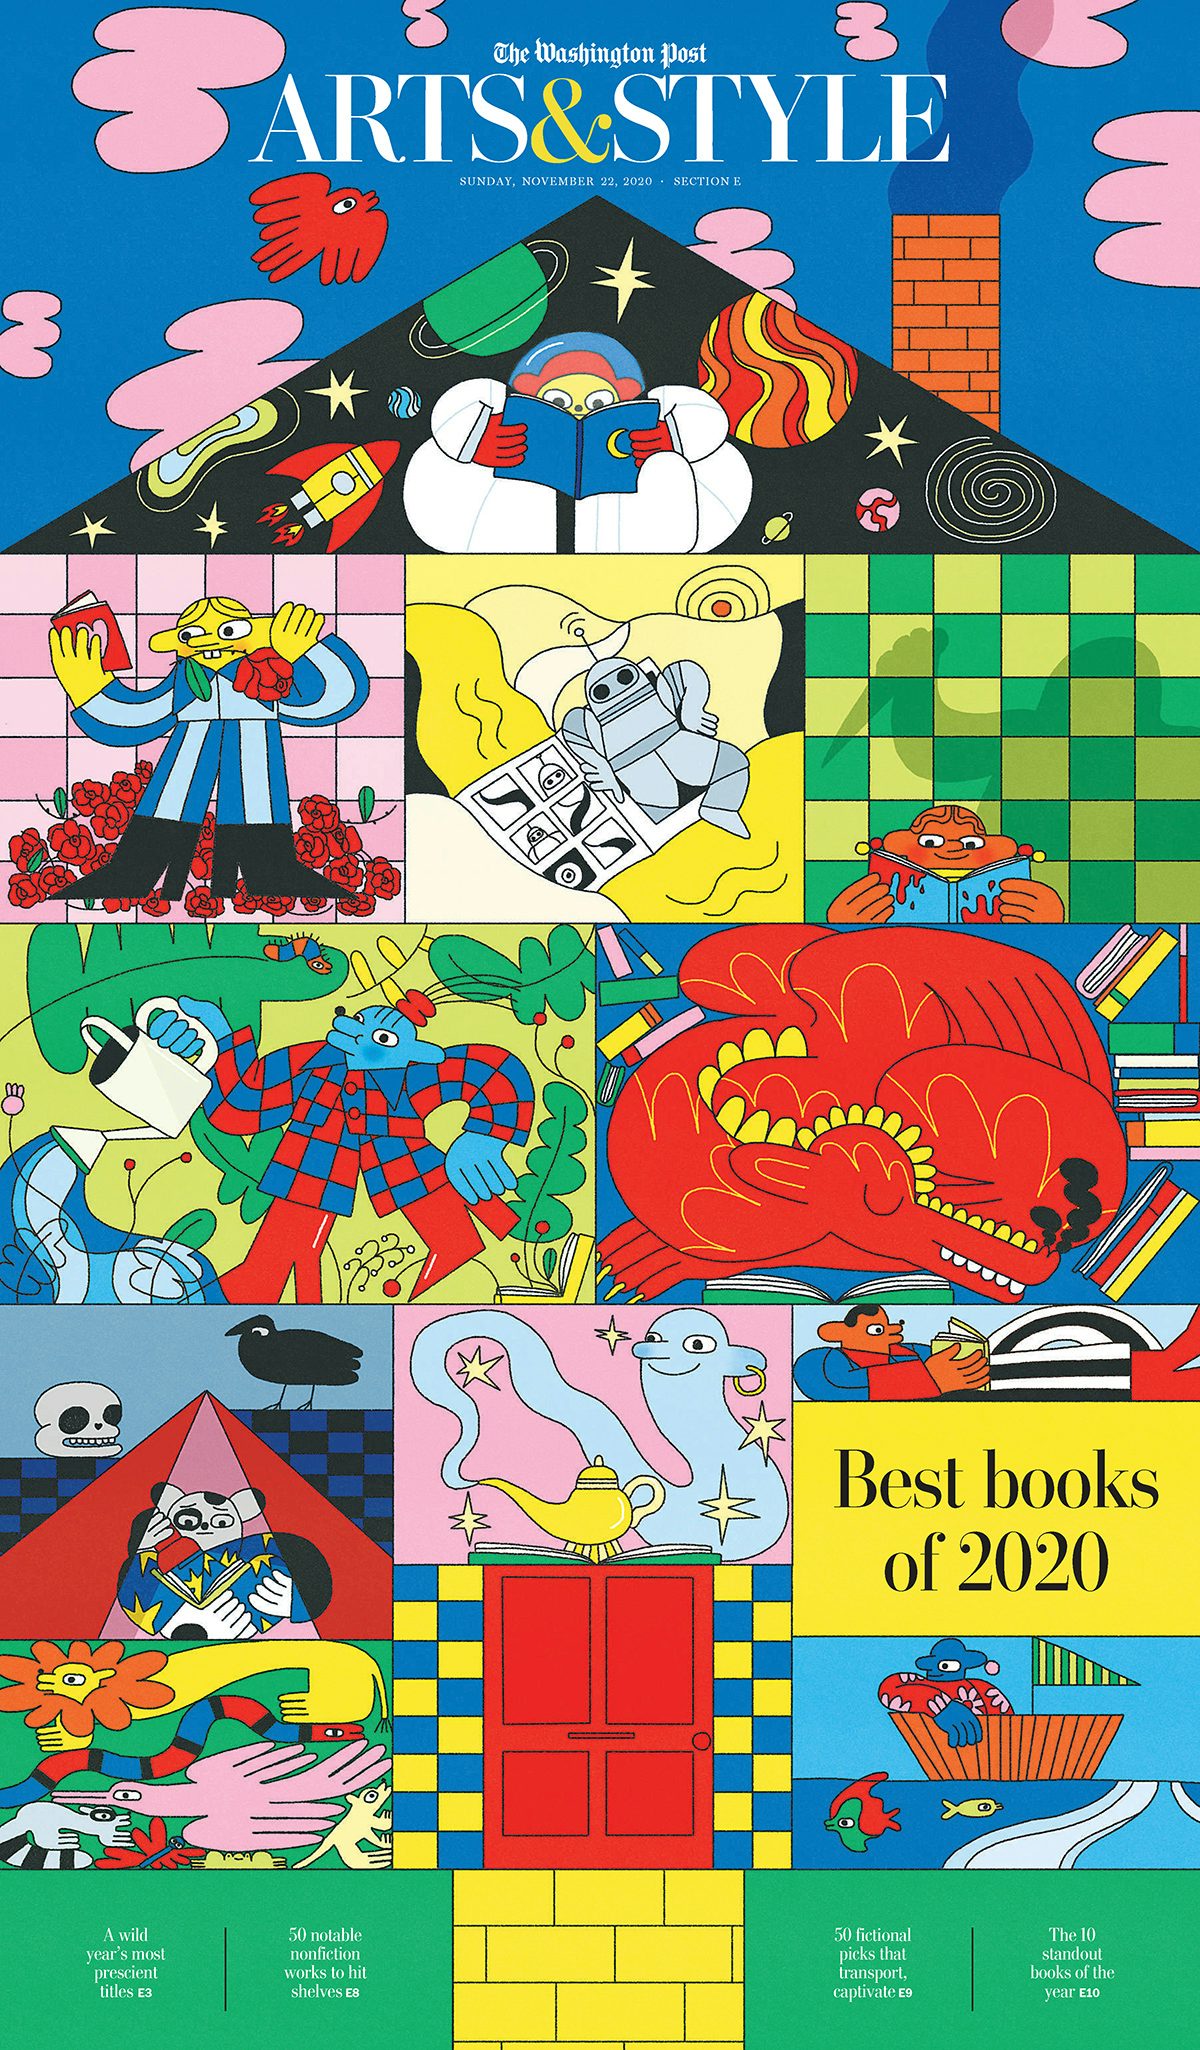 Illustrated cover showing characters reading books for the Washington Post by Aysha Tengiz